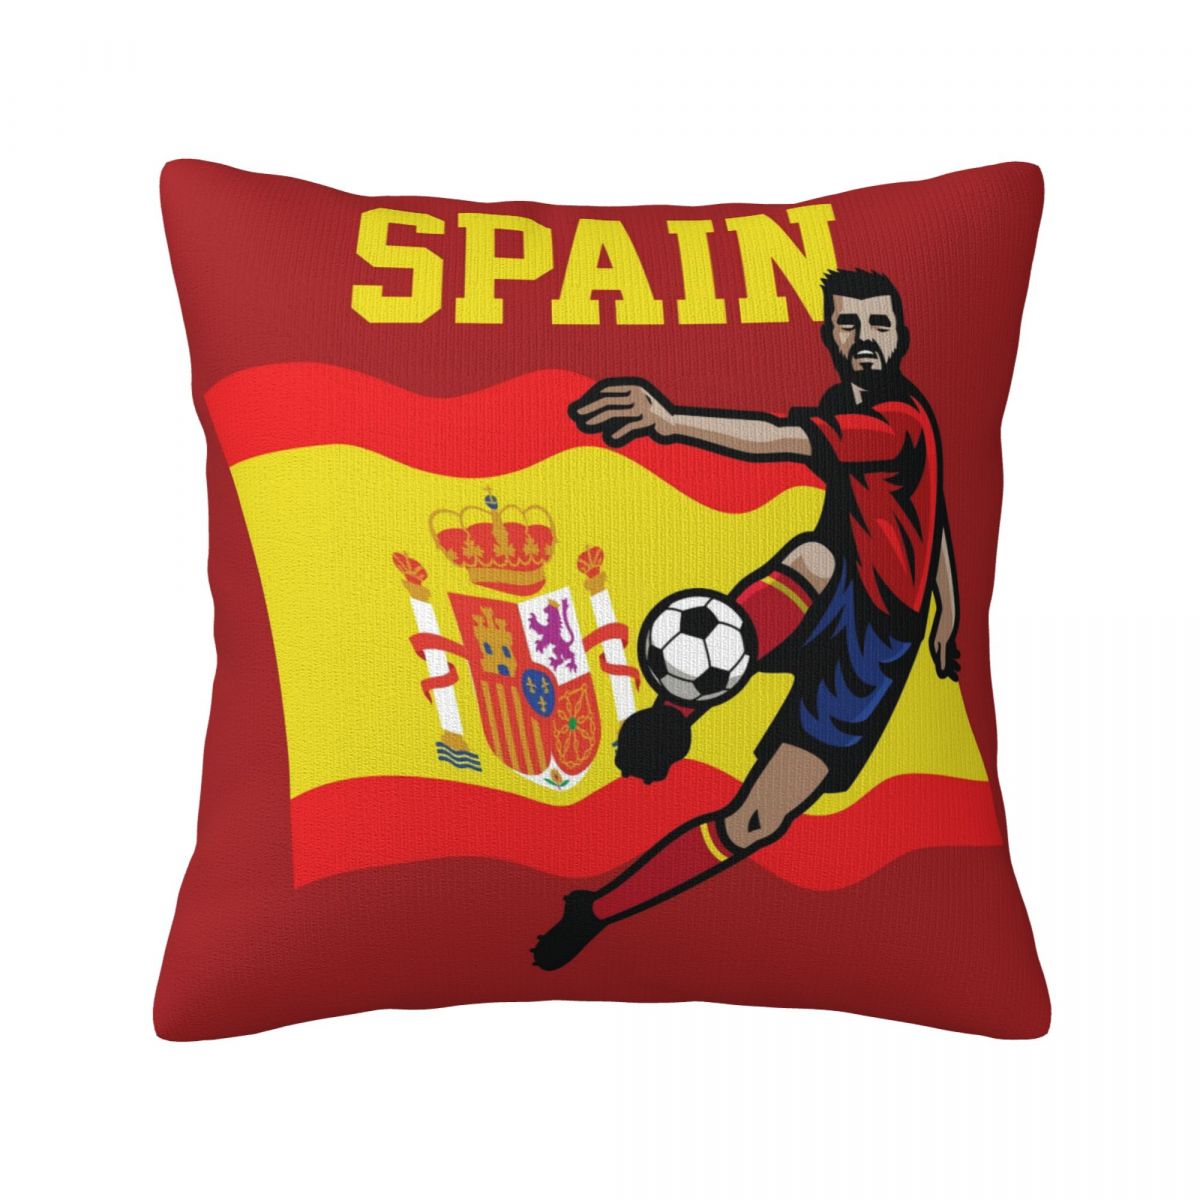 Spain Soccer Player Decorative Square Throw Pillow Covers